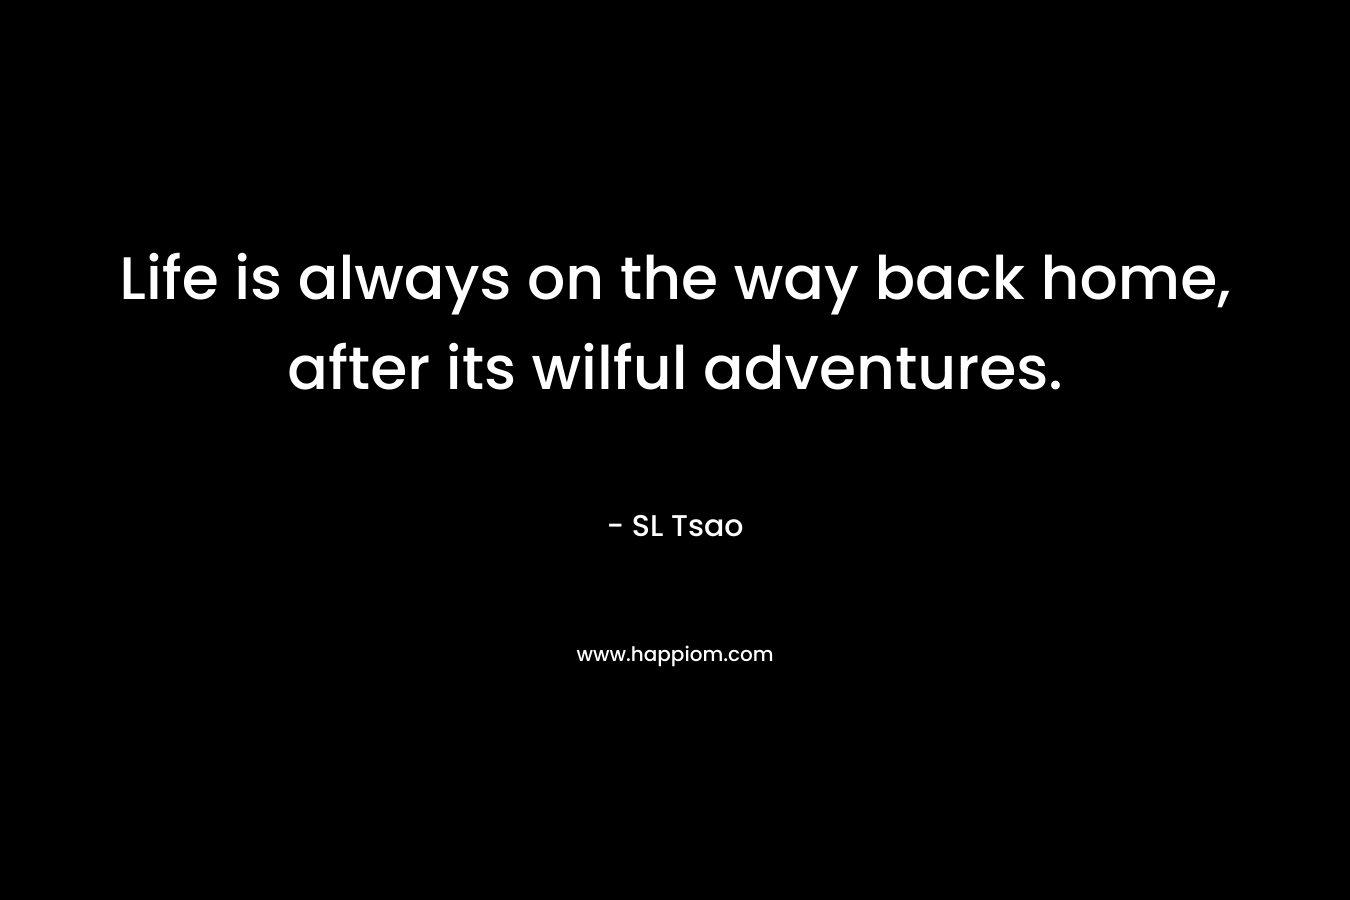 Life is always on the way back home, after its wilful adventures. – SL Tsao